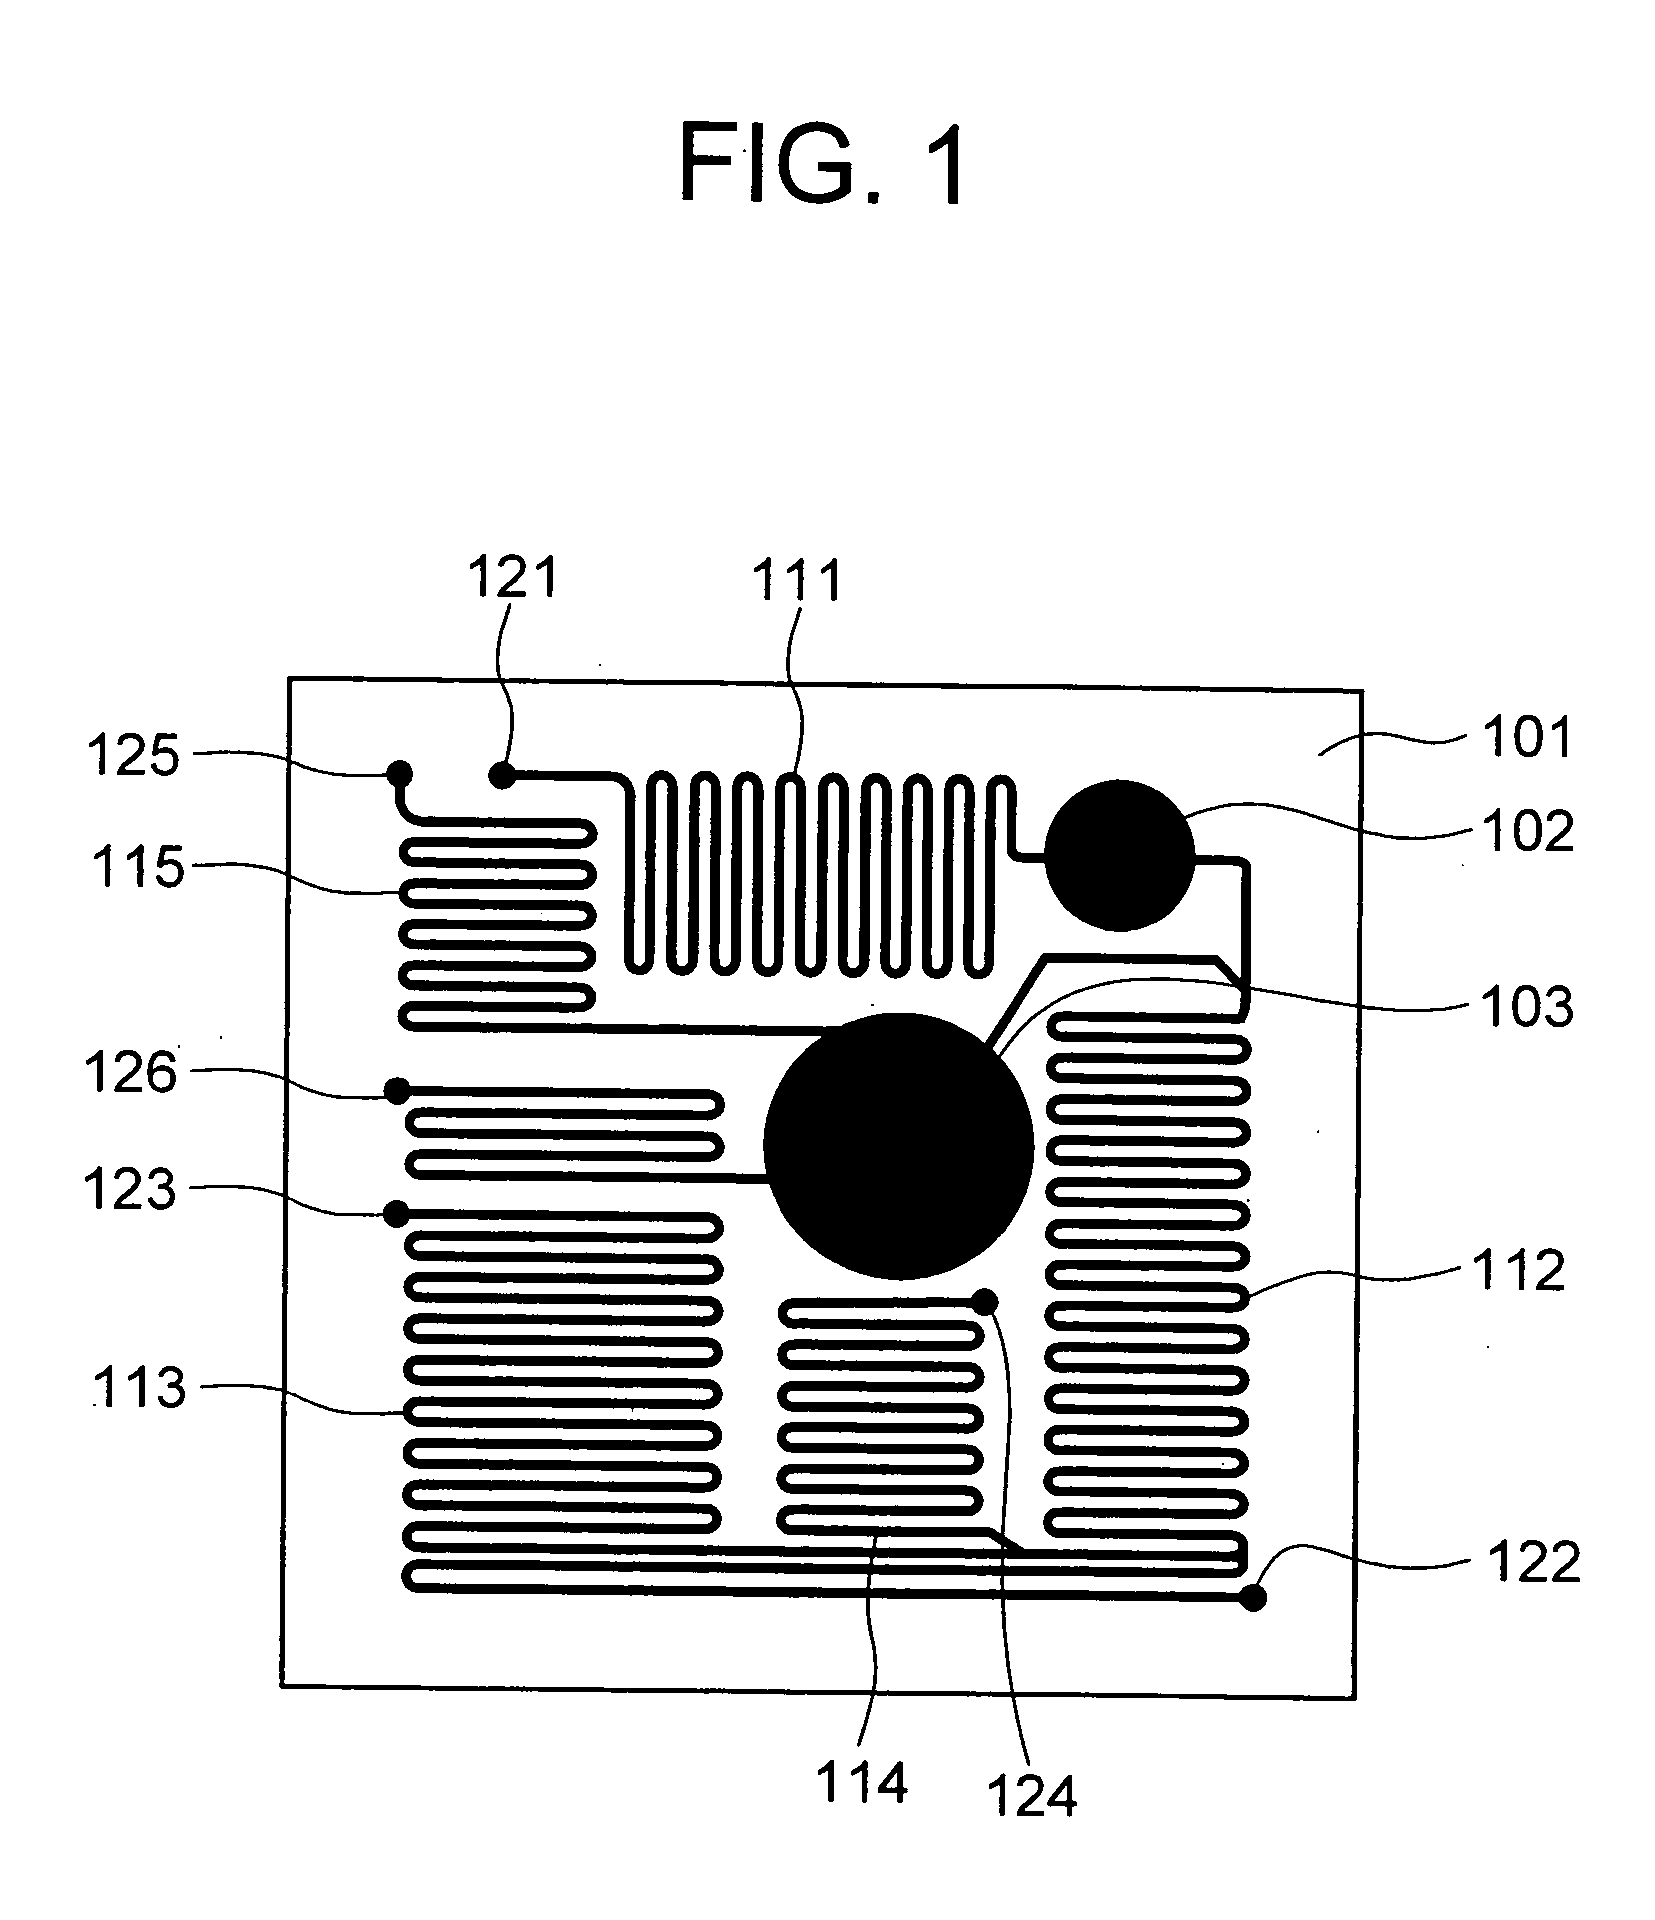 Chip for processing of gene and apparatus for processing of gene